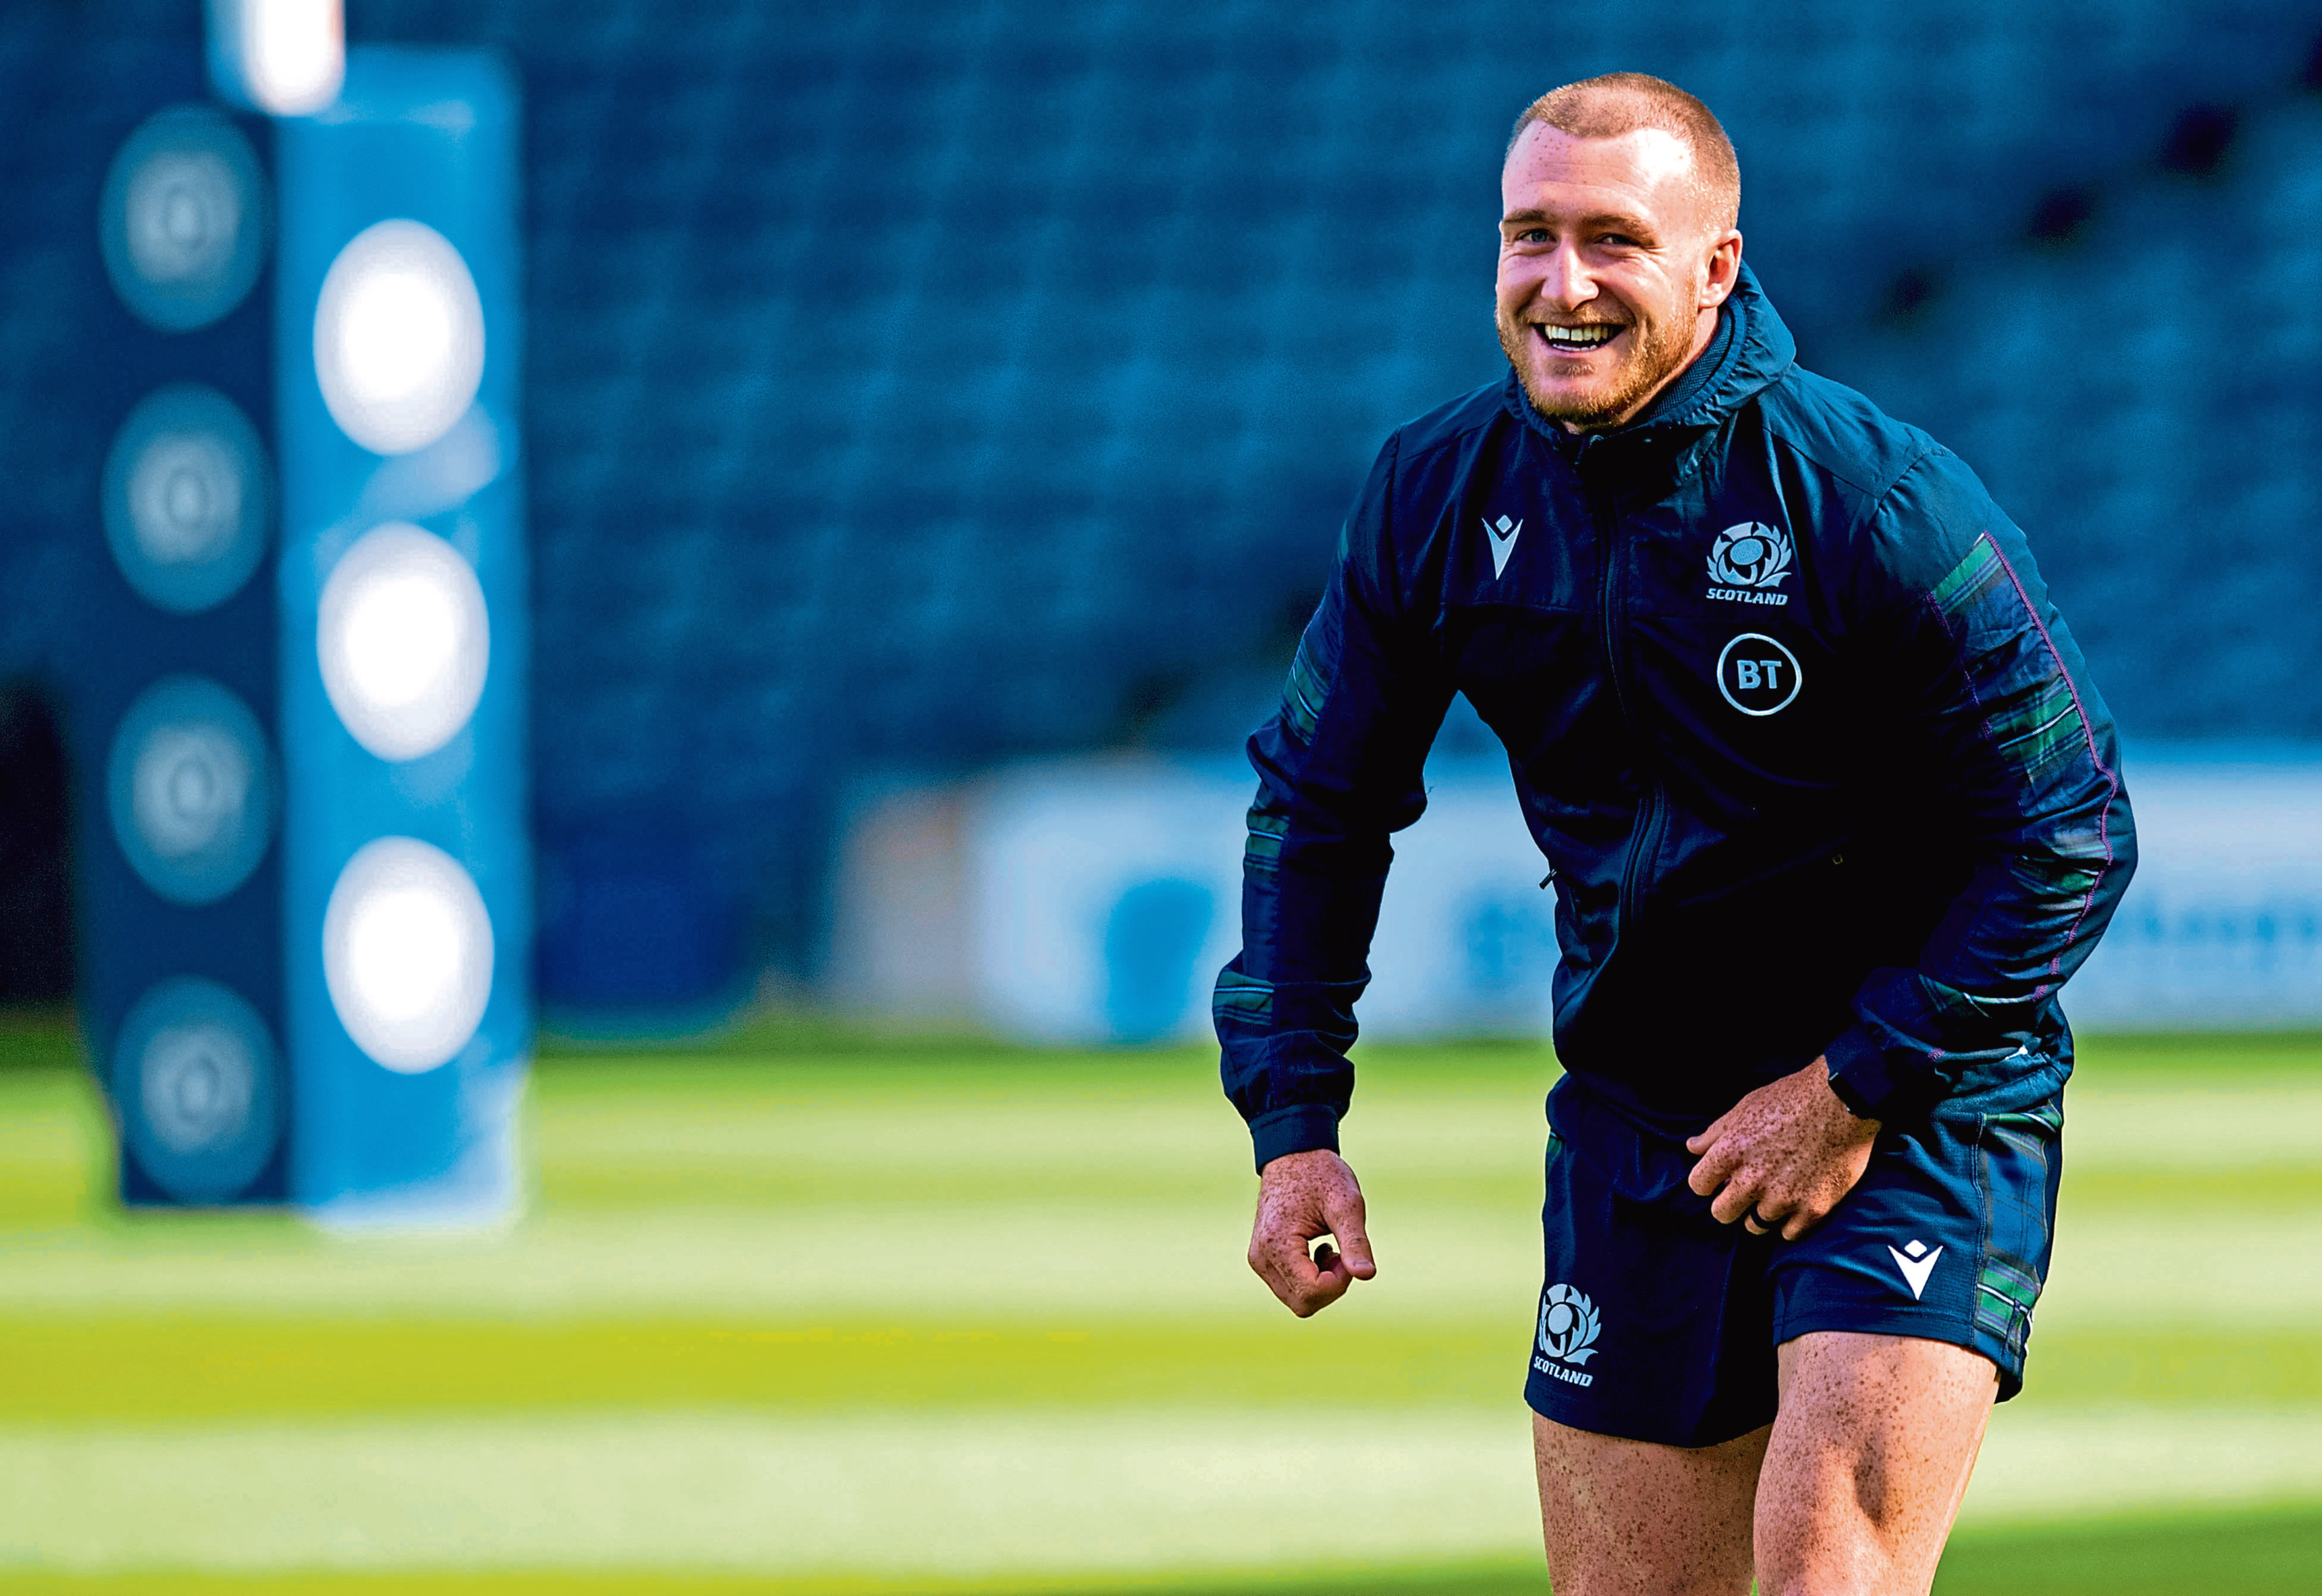 Stuart Hogg is the longest-serving and most authoritative member left in the Scotland team leadership group.